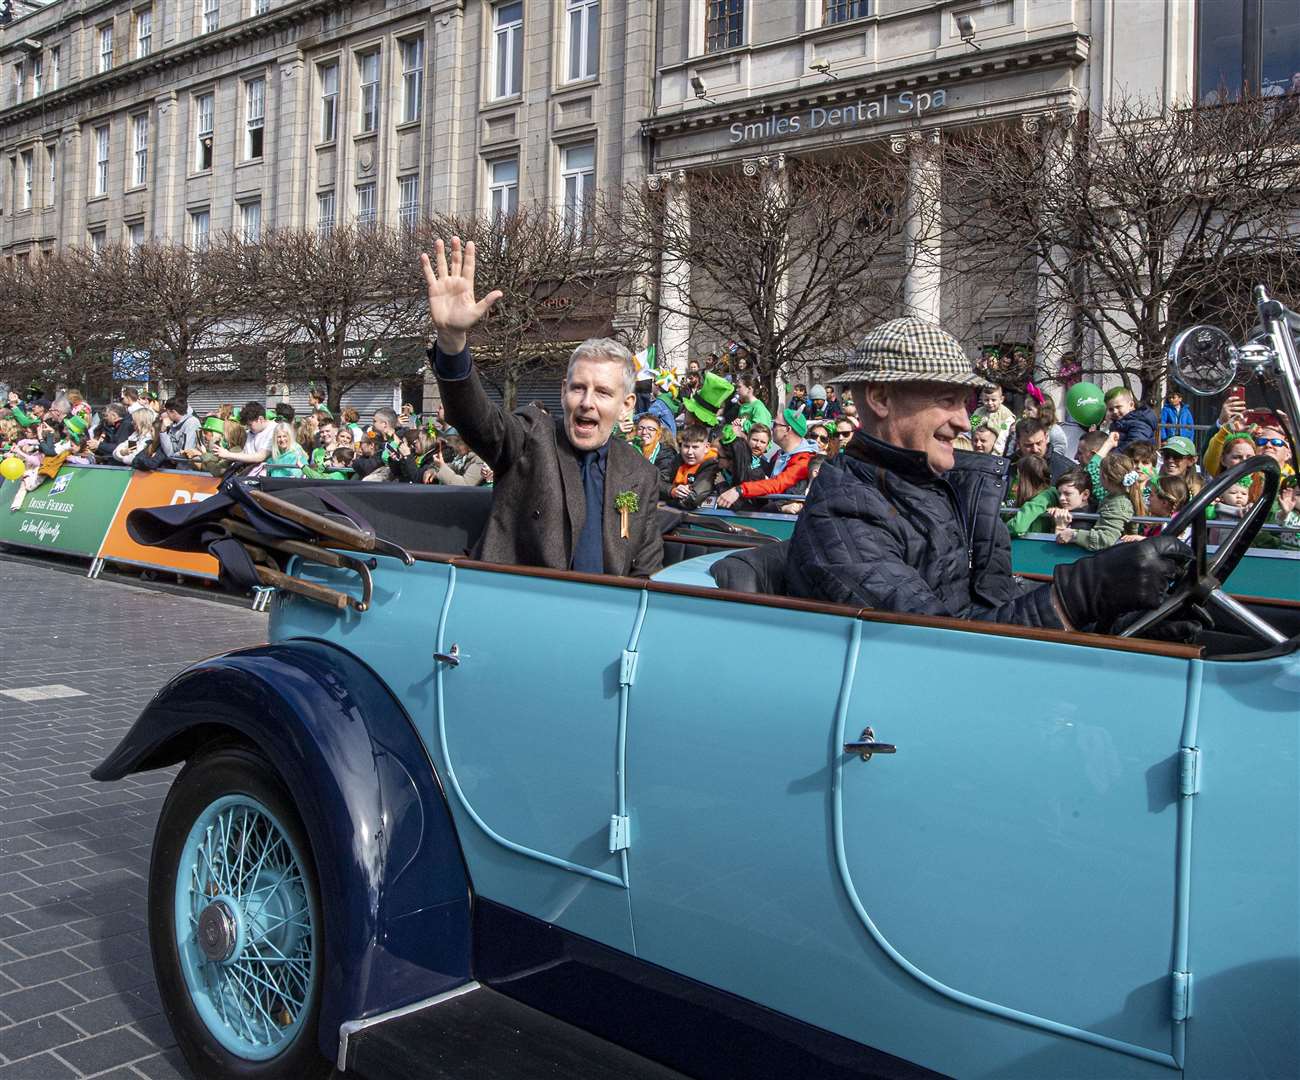 TV presenter Patrick Kielty was the grand marshal of the national parade in Dublin and described himself as ‘the proudest man in Ireland’ (Michael Chester/PA)